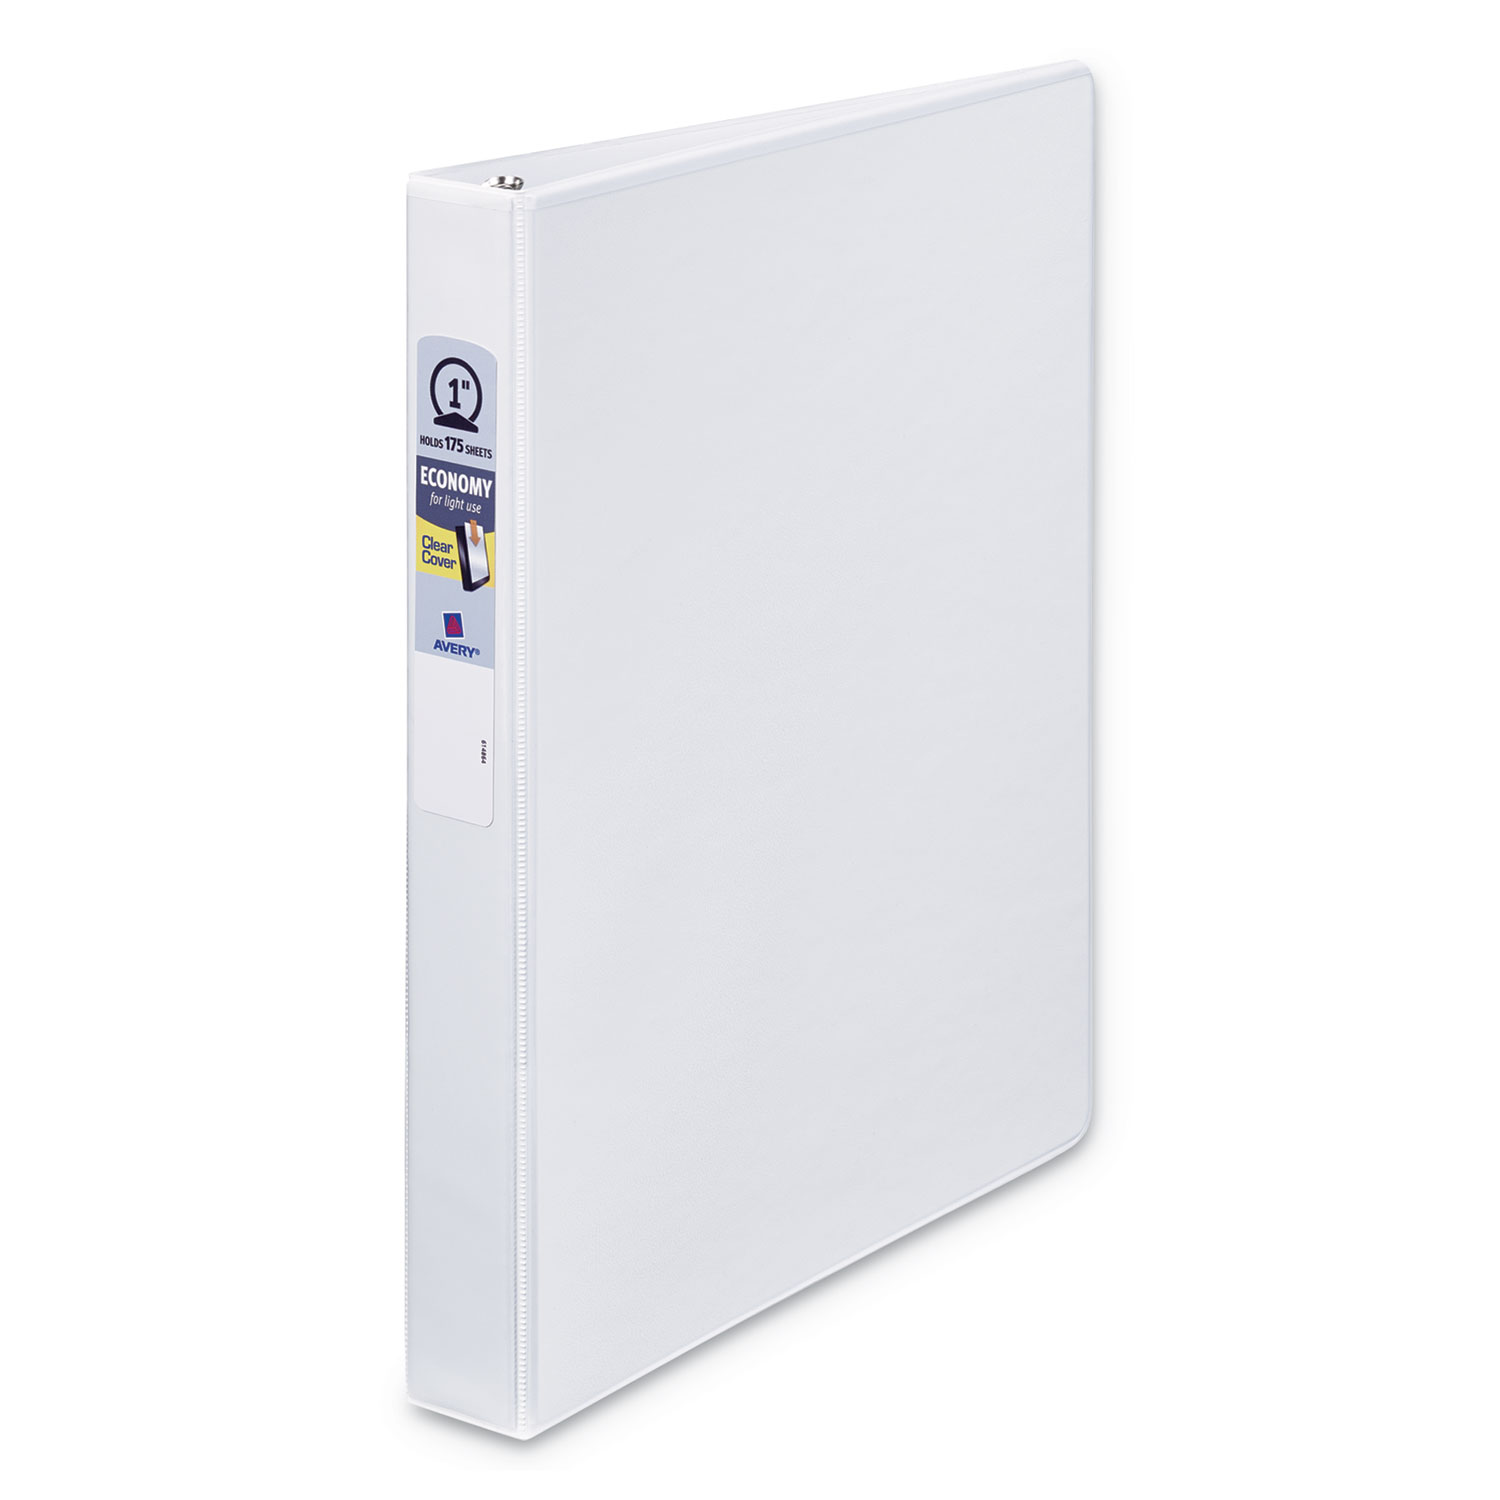  Avery 21085 Economy View Binder with Round Rings , 3 Rings, 1 Capacity, 11 x 8.5, White (AVE21085) 